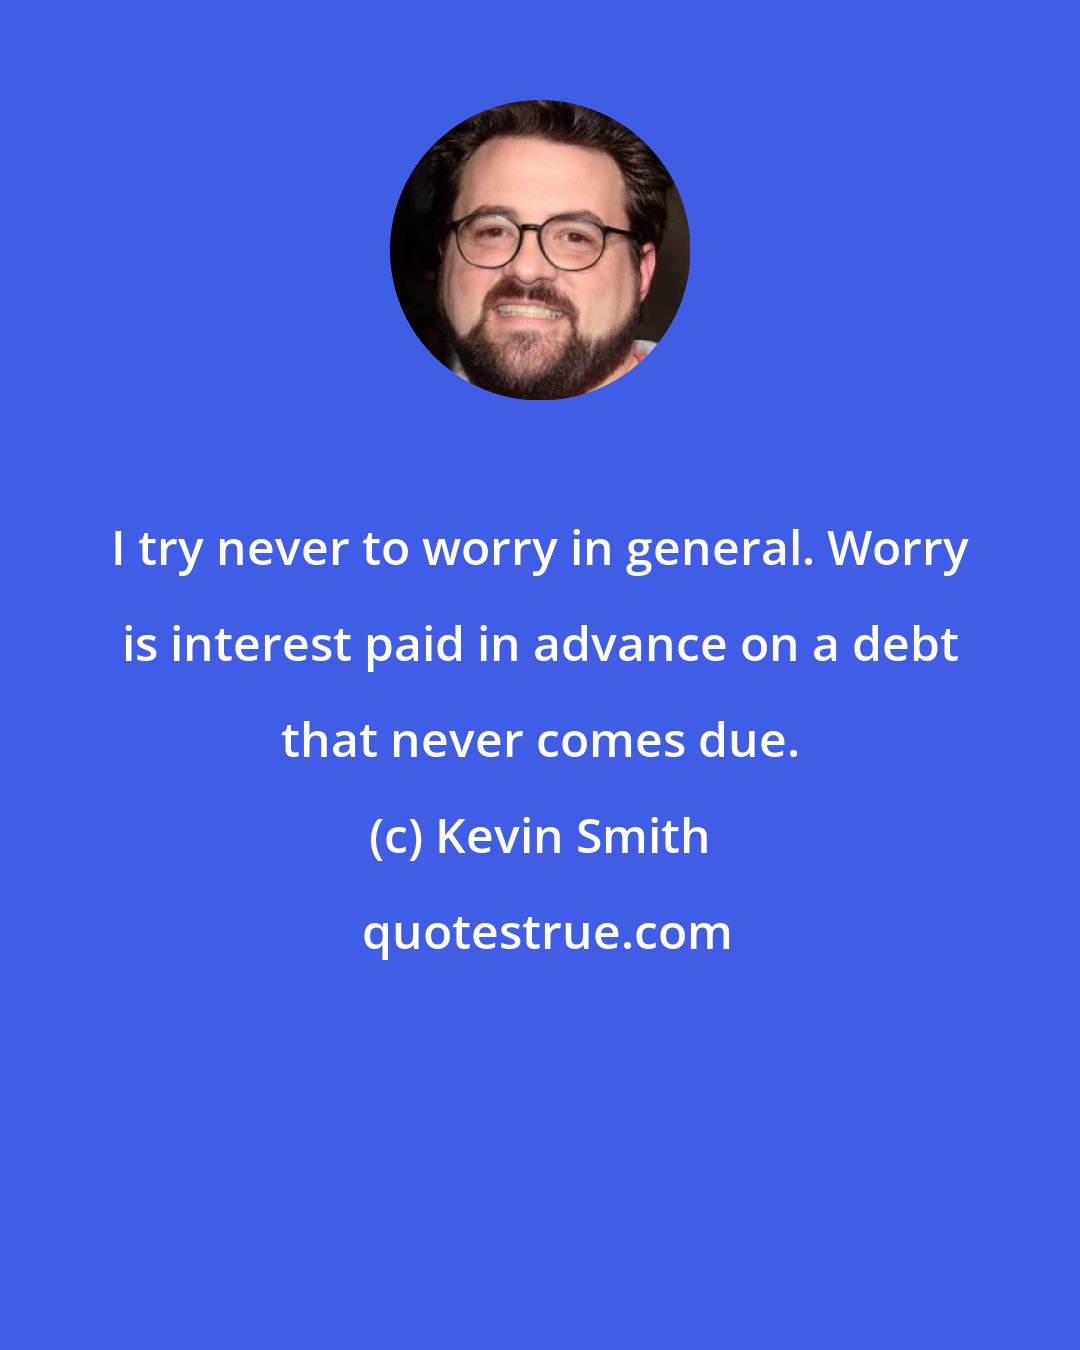 Kevin Smith: I try never to worry in general. Worry is interest paid in advance on a debt that never comes due.